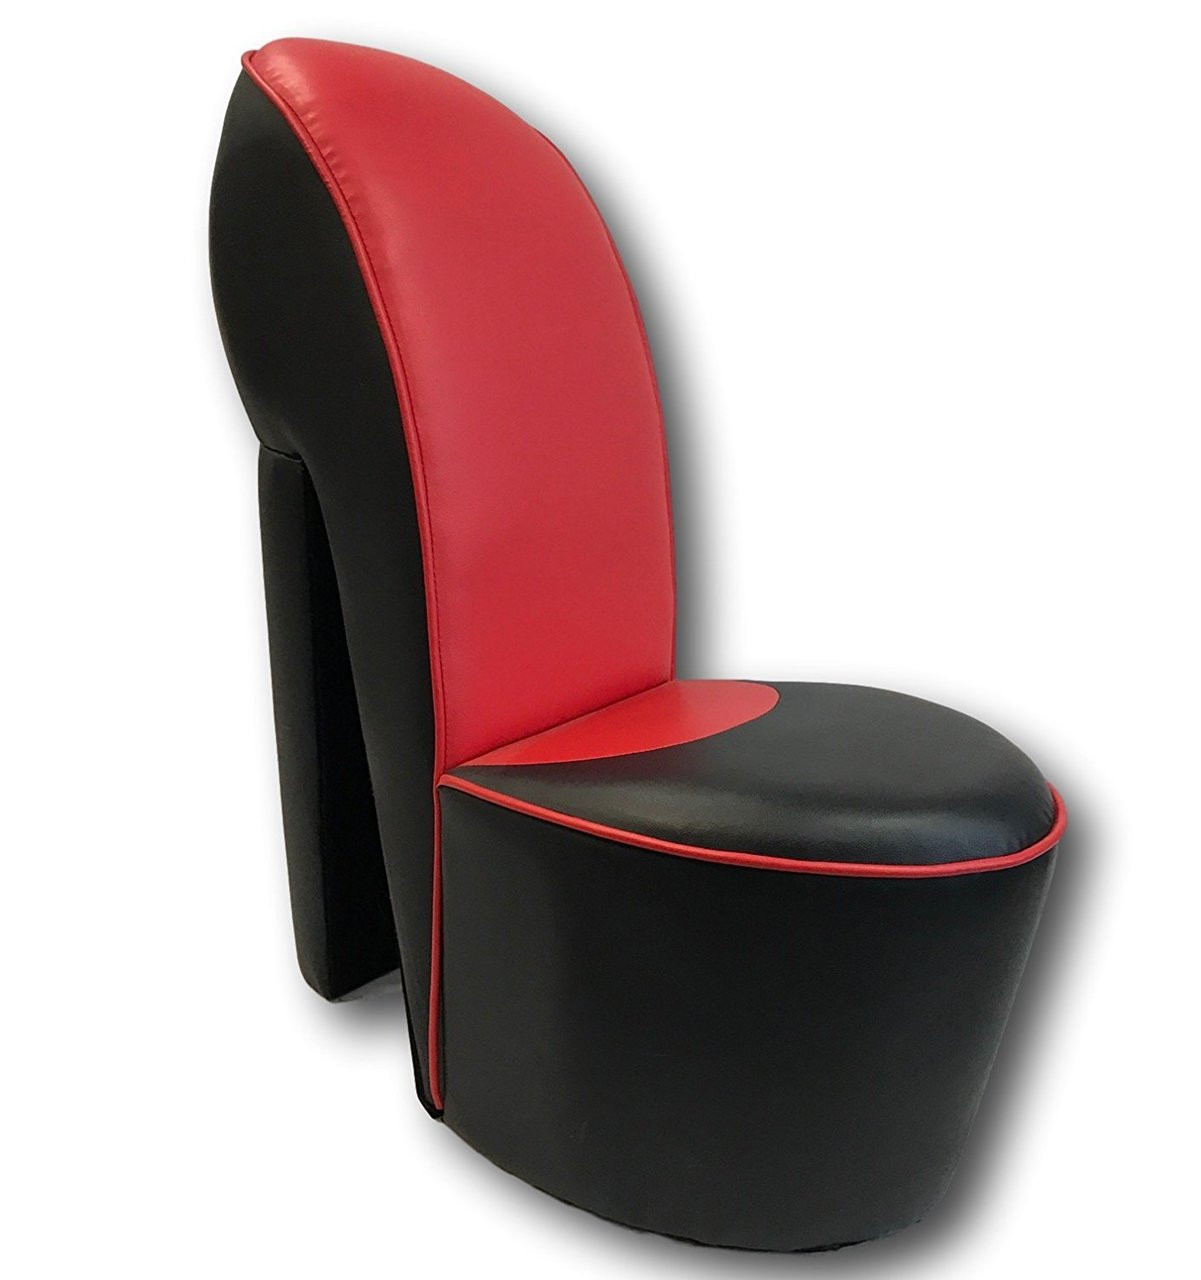 High Heel Shoe Style Fashionable Living Room Accent Chair Very